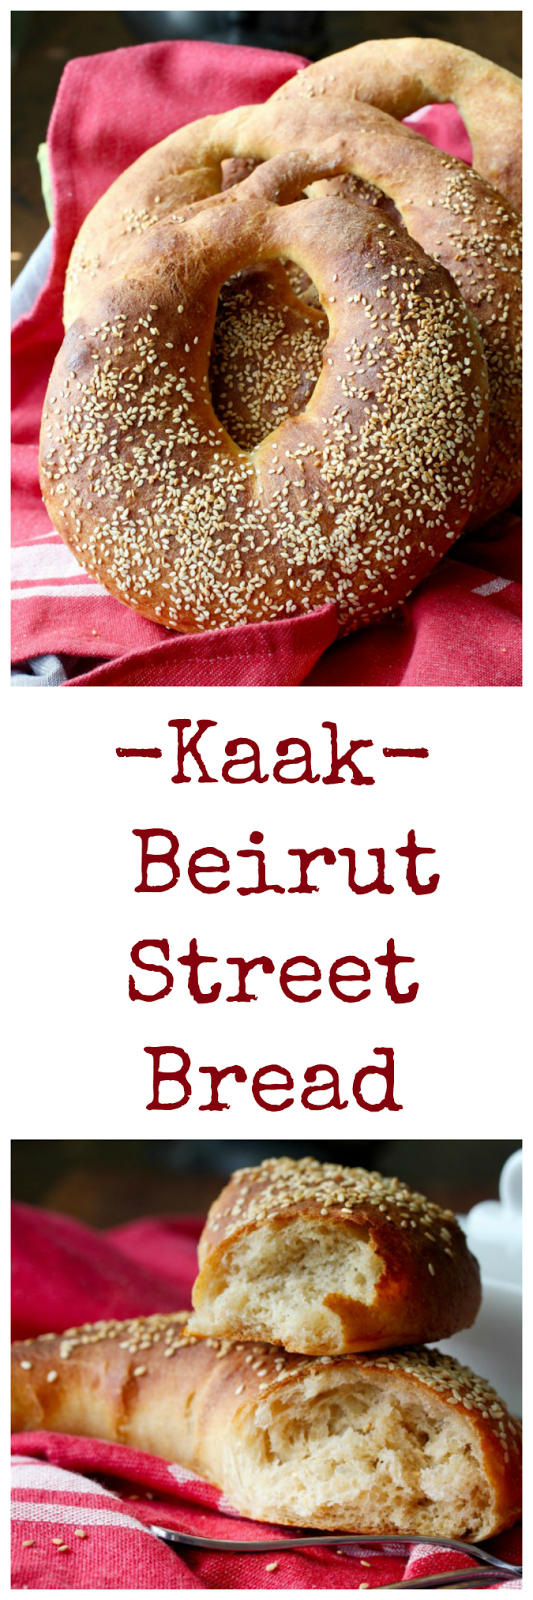 Kaak is a Lebanese street bread, shaped like a purse, coated in sesame seeds, and sold from carts by street vendors. 